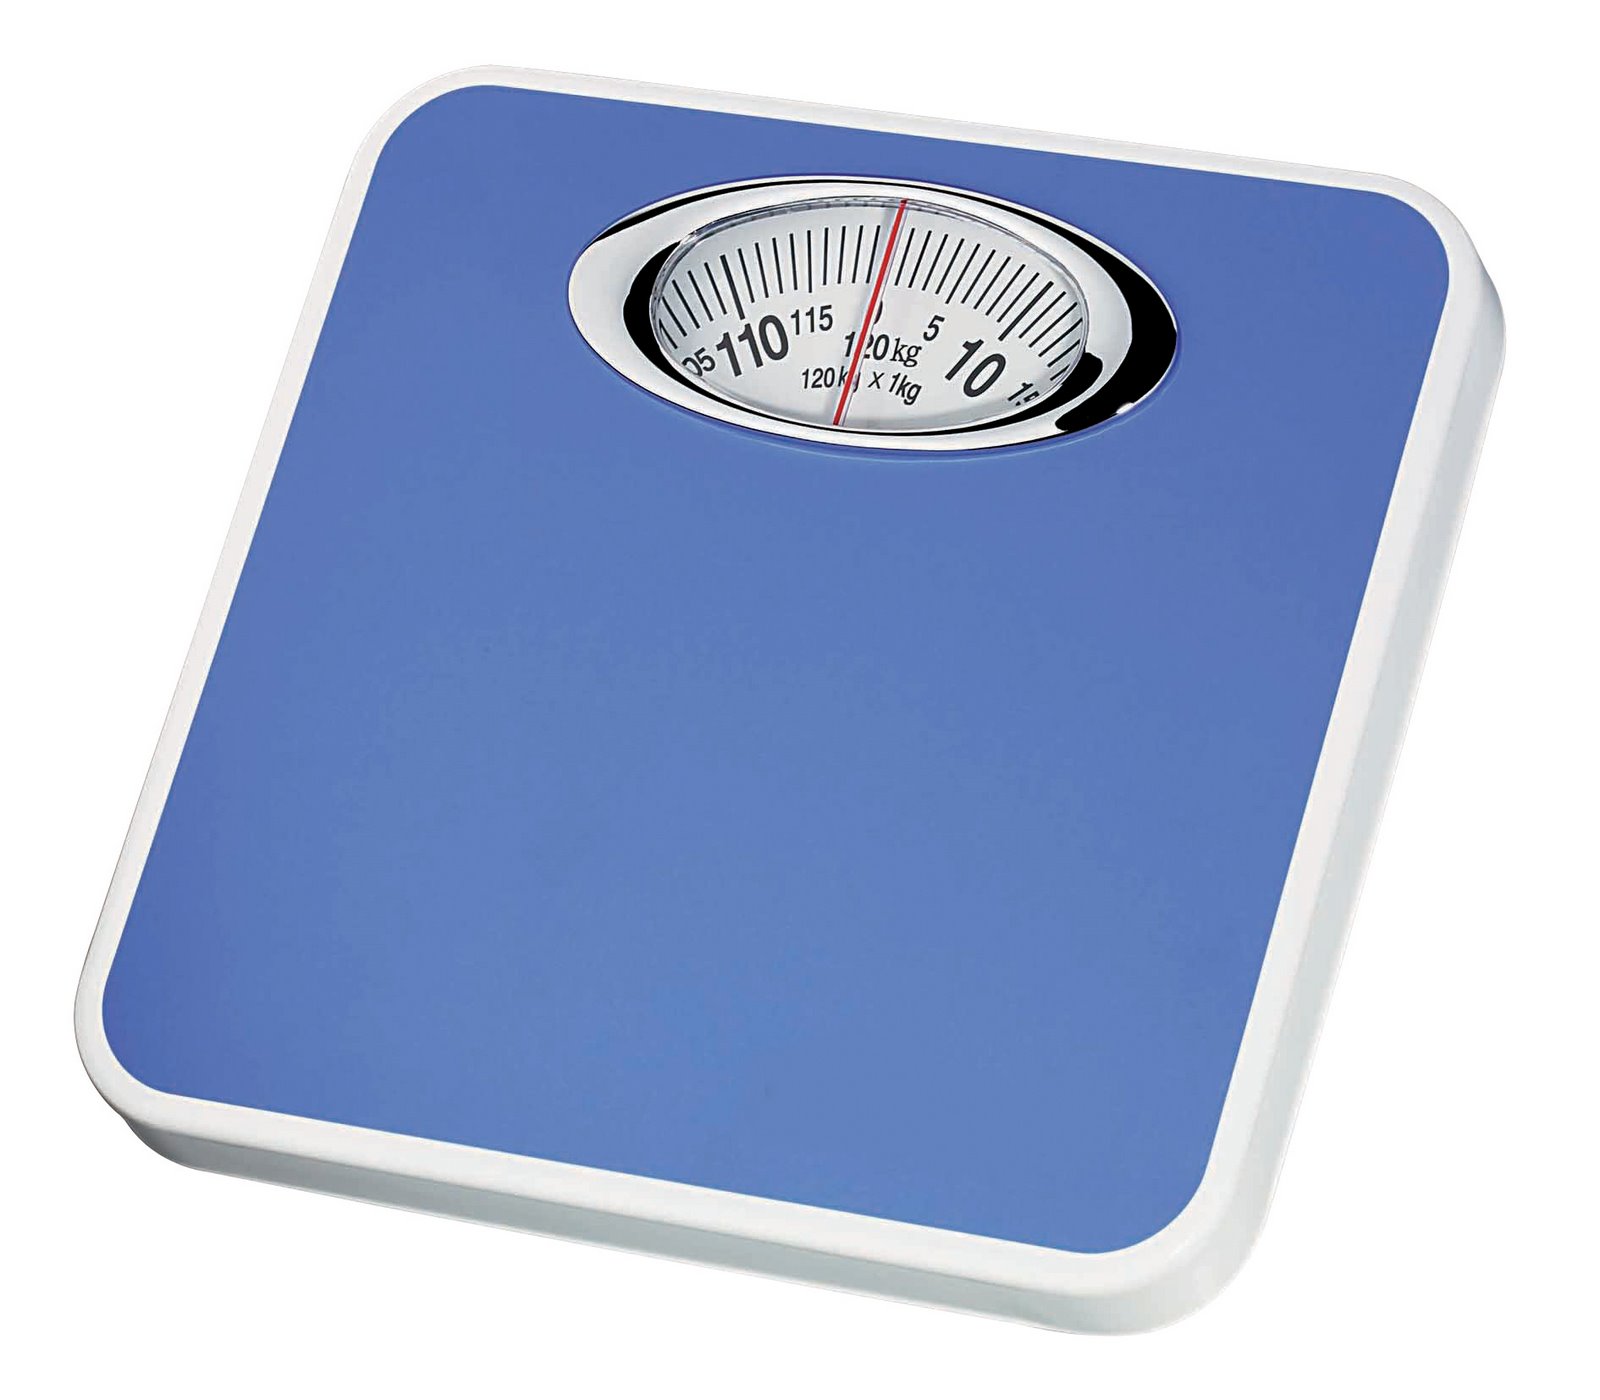 Weighing Scale Manufacturers, Weighing Scale Exporters & Distributors